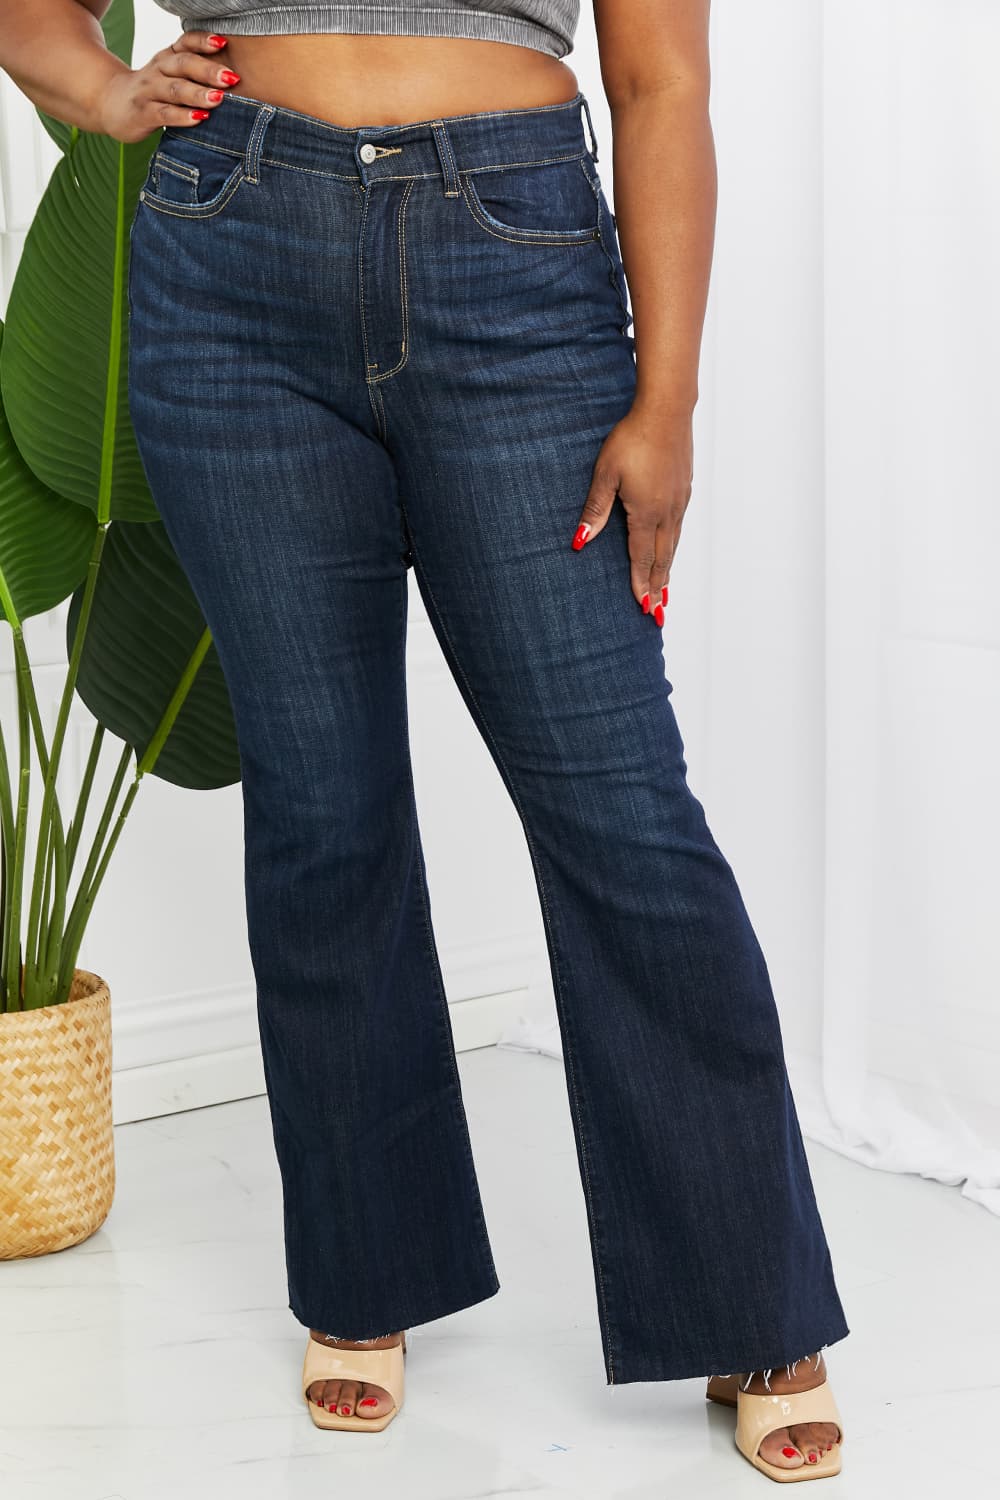 Plus Size, Judy Blue, High Waisted Raw Hem Tall Flare Jeans Style 82343